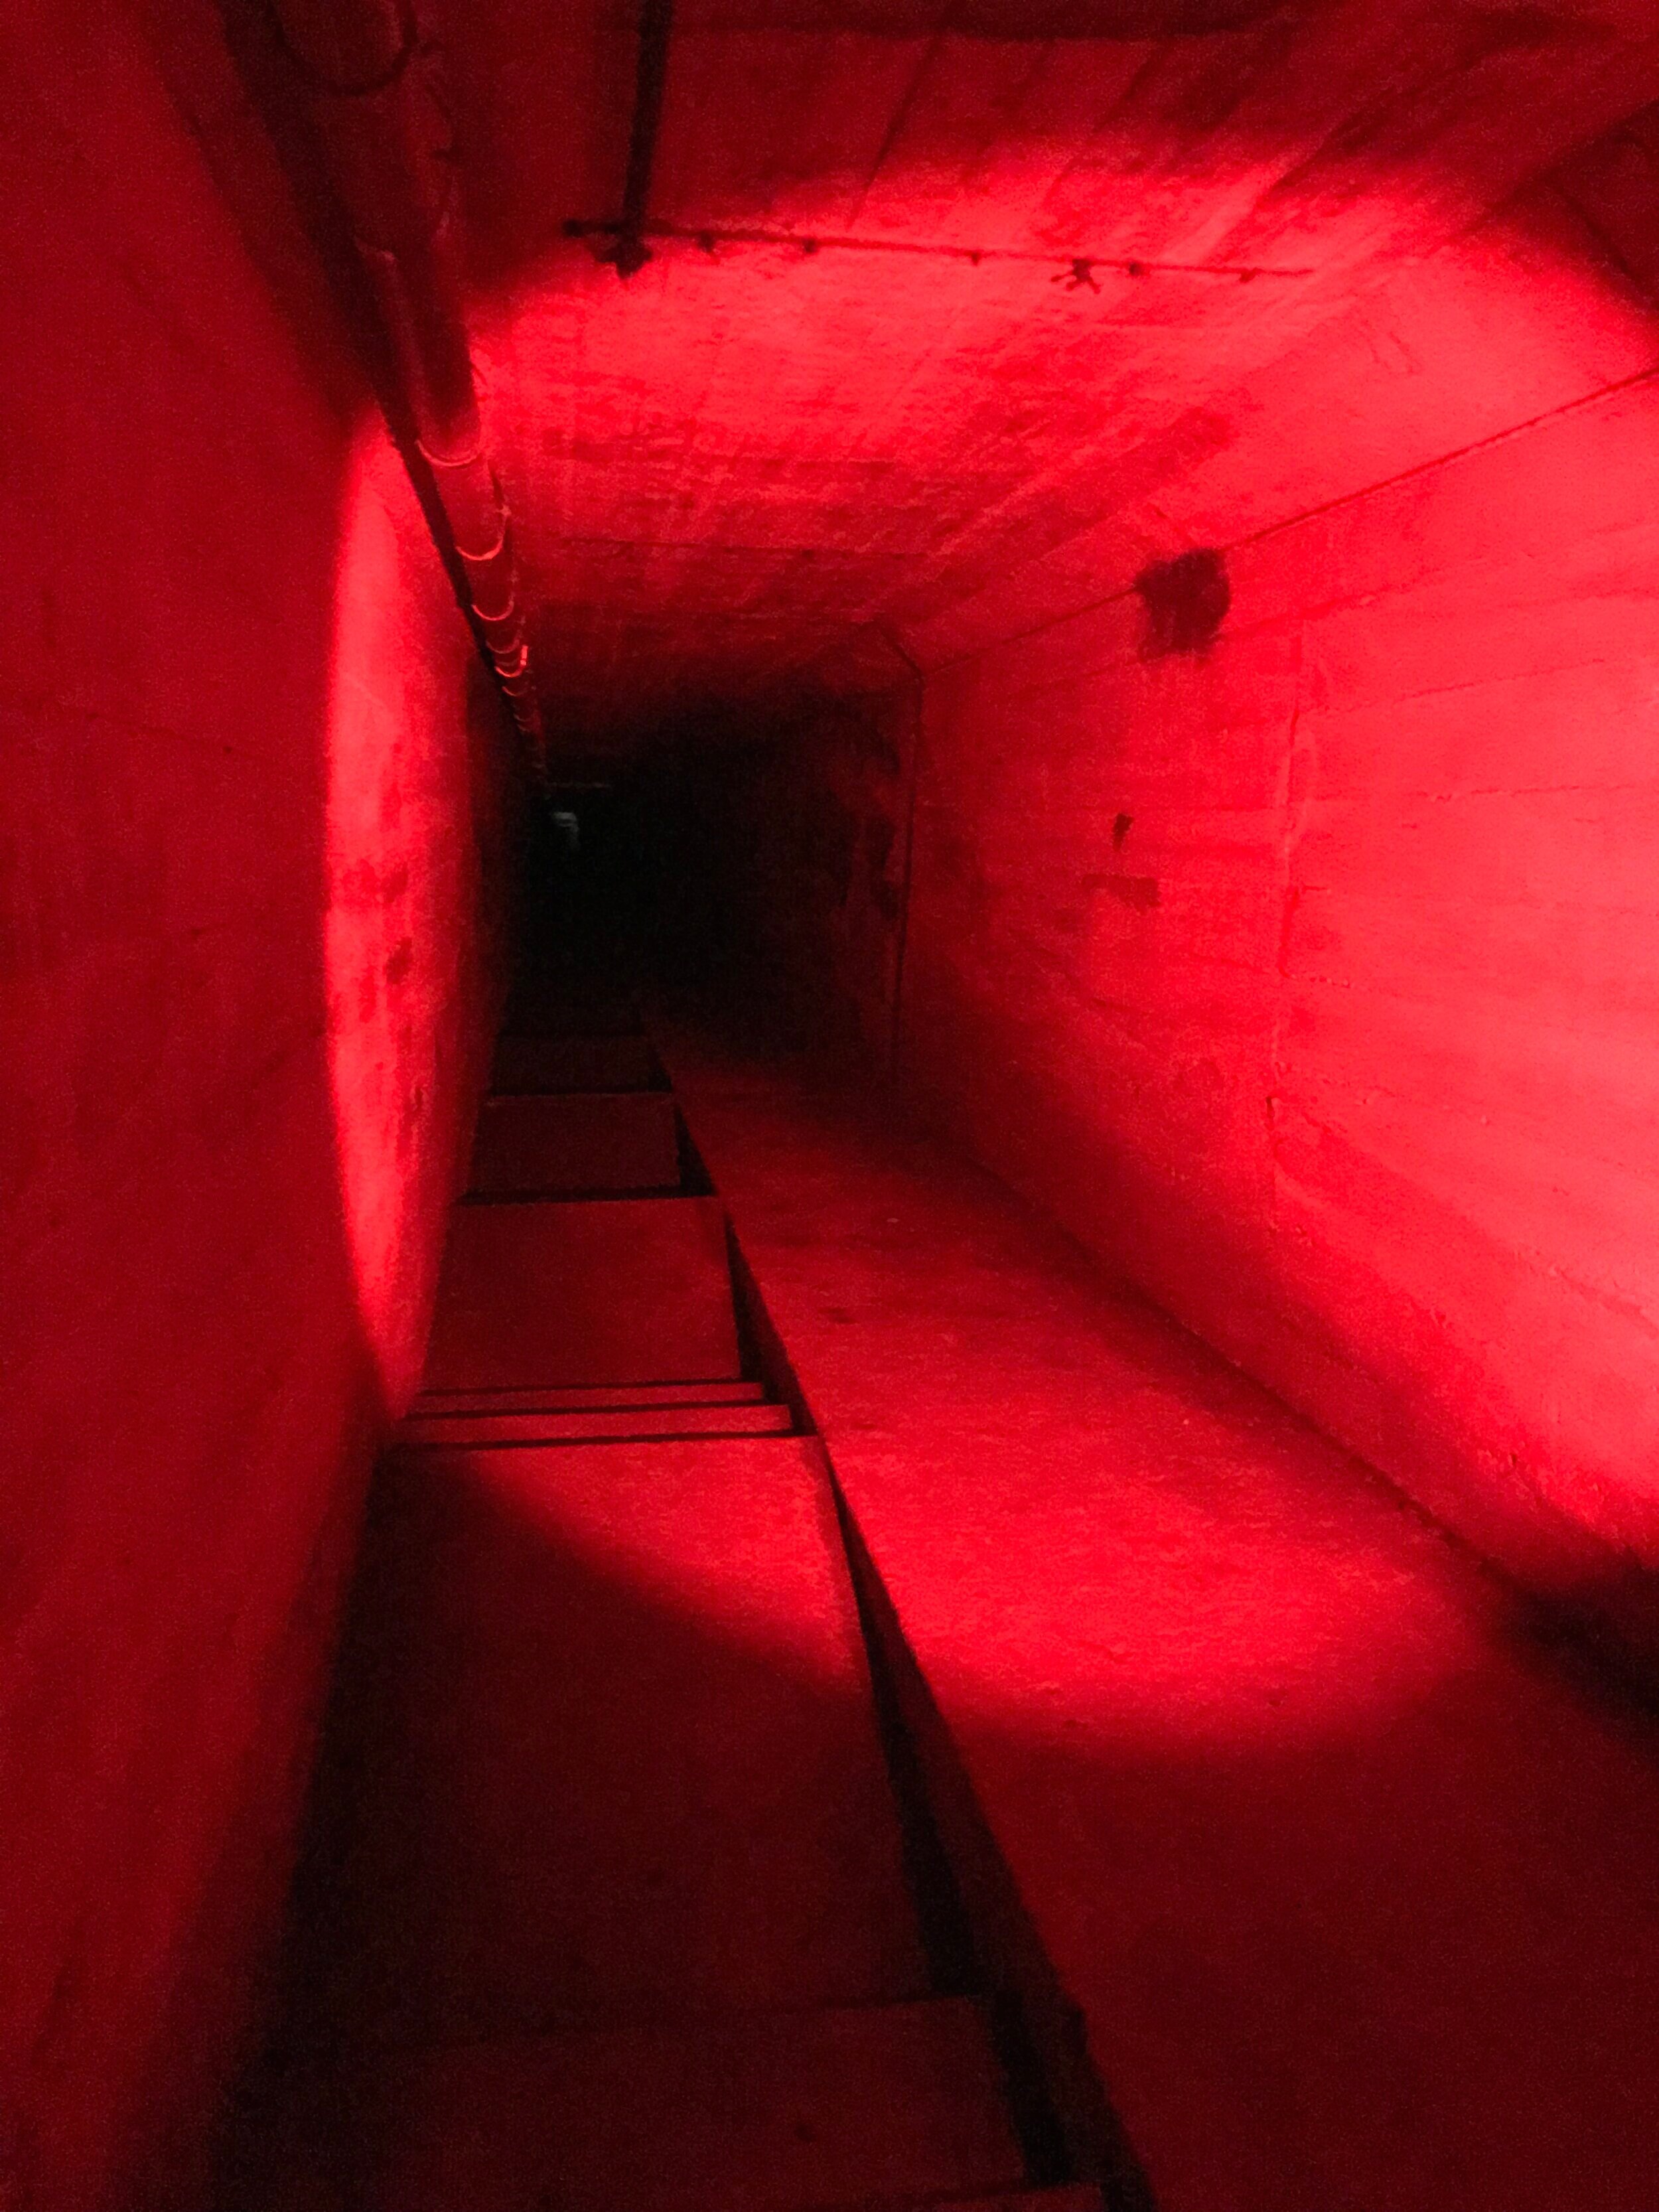  Halfway down the “Death Tunnel” where something is strangely illuminated where no light should be.  